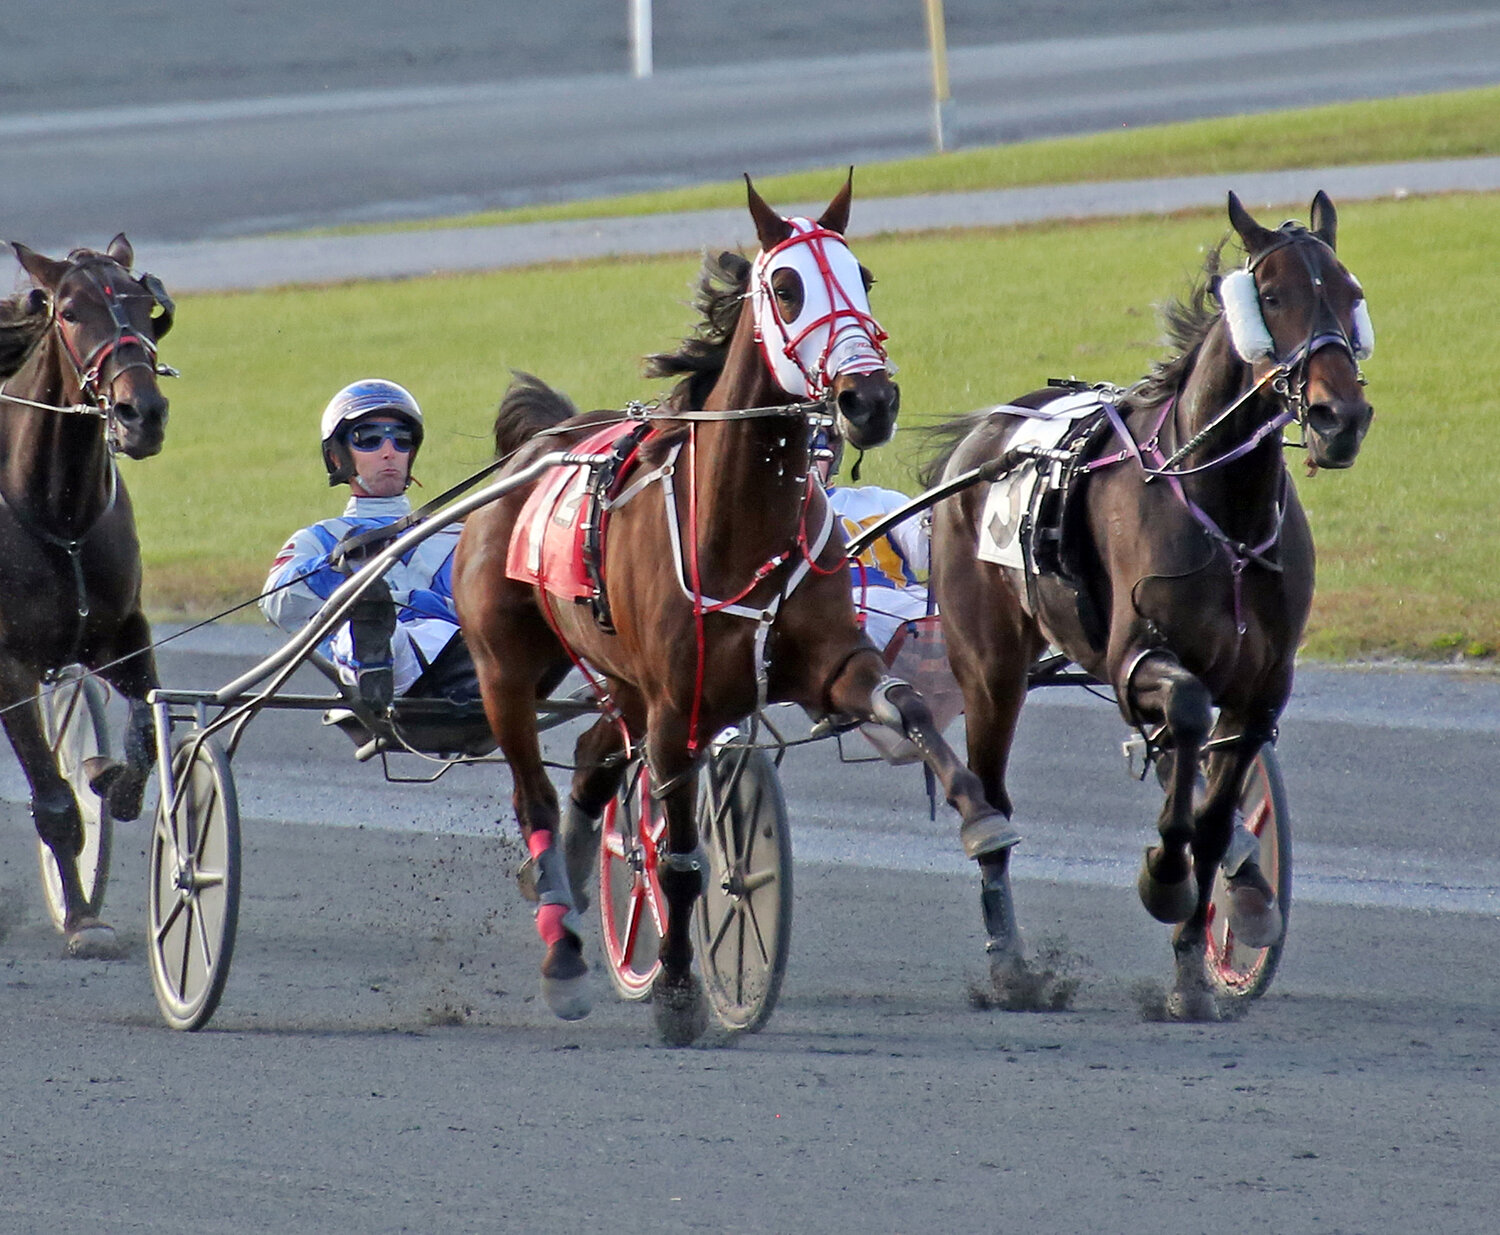 Driver Art Stafford Jr. guides Unbelievable Kemp down the stretch to win the second race Wednesday night at Harrington Raceway. It was the final night of the fall harness racing meet.